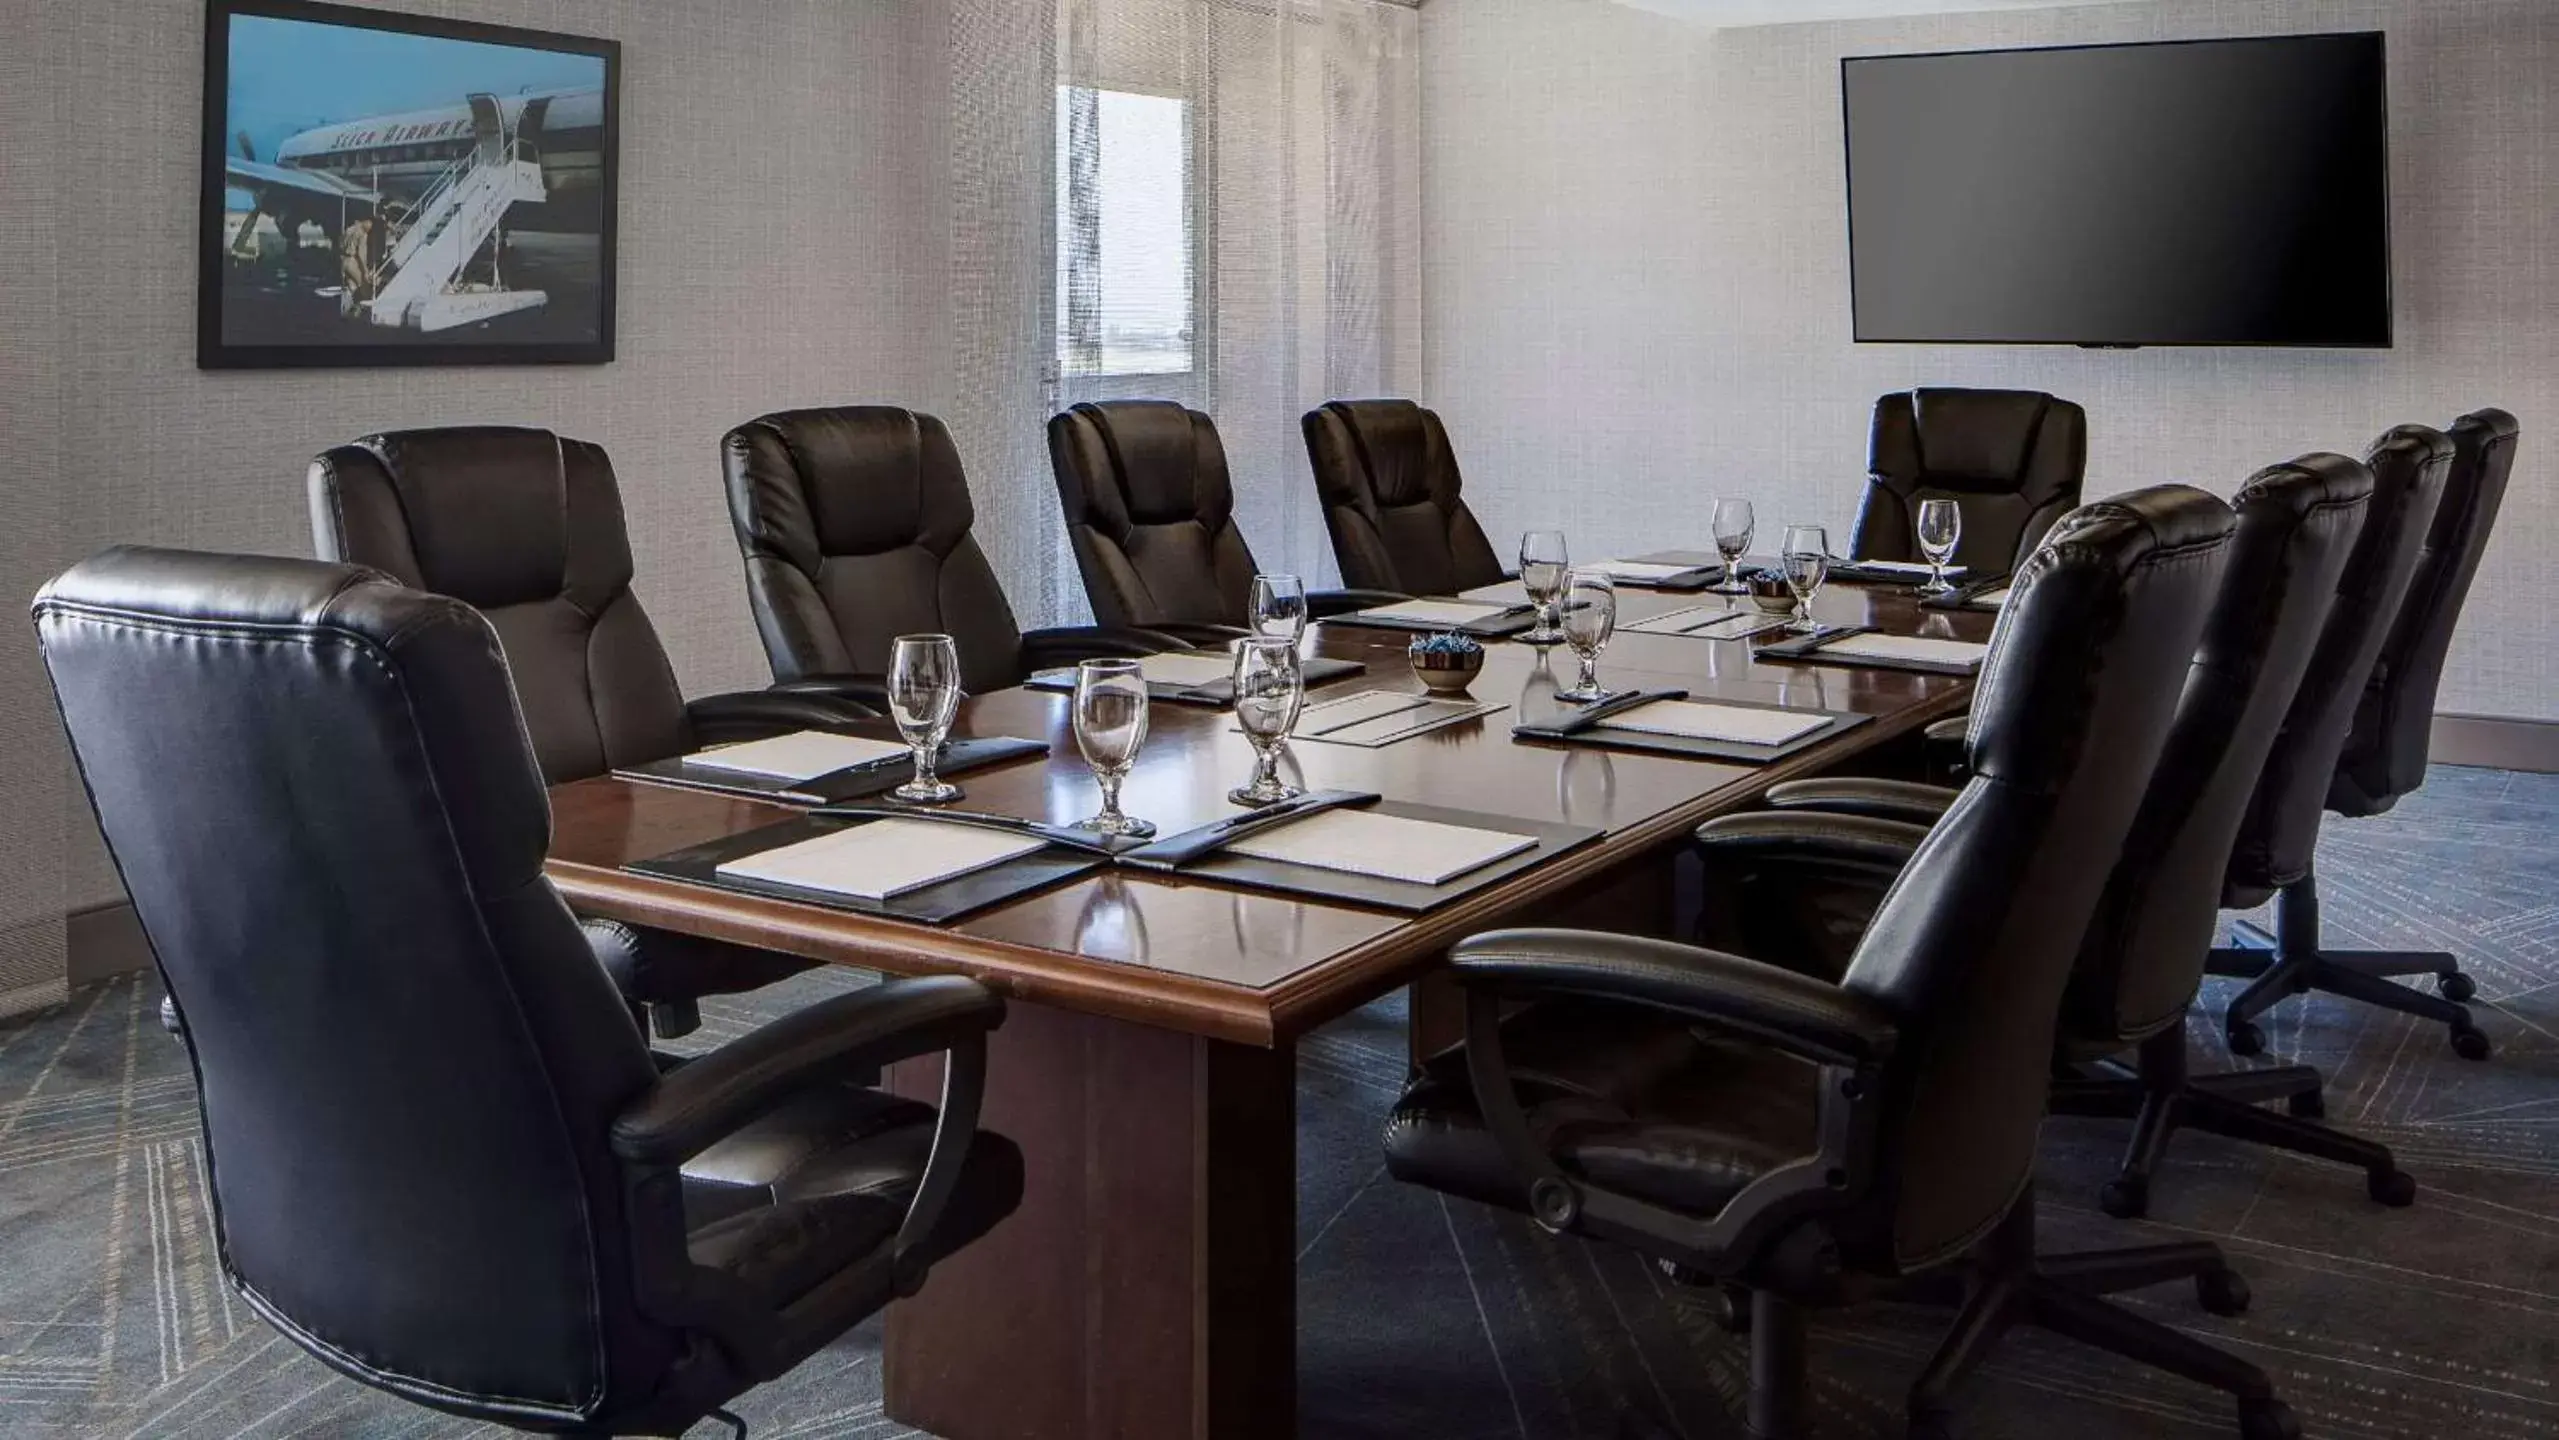 Meeting/conference room, Business Area/Conference Room in Hyatt Regency DFW International Airport